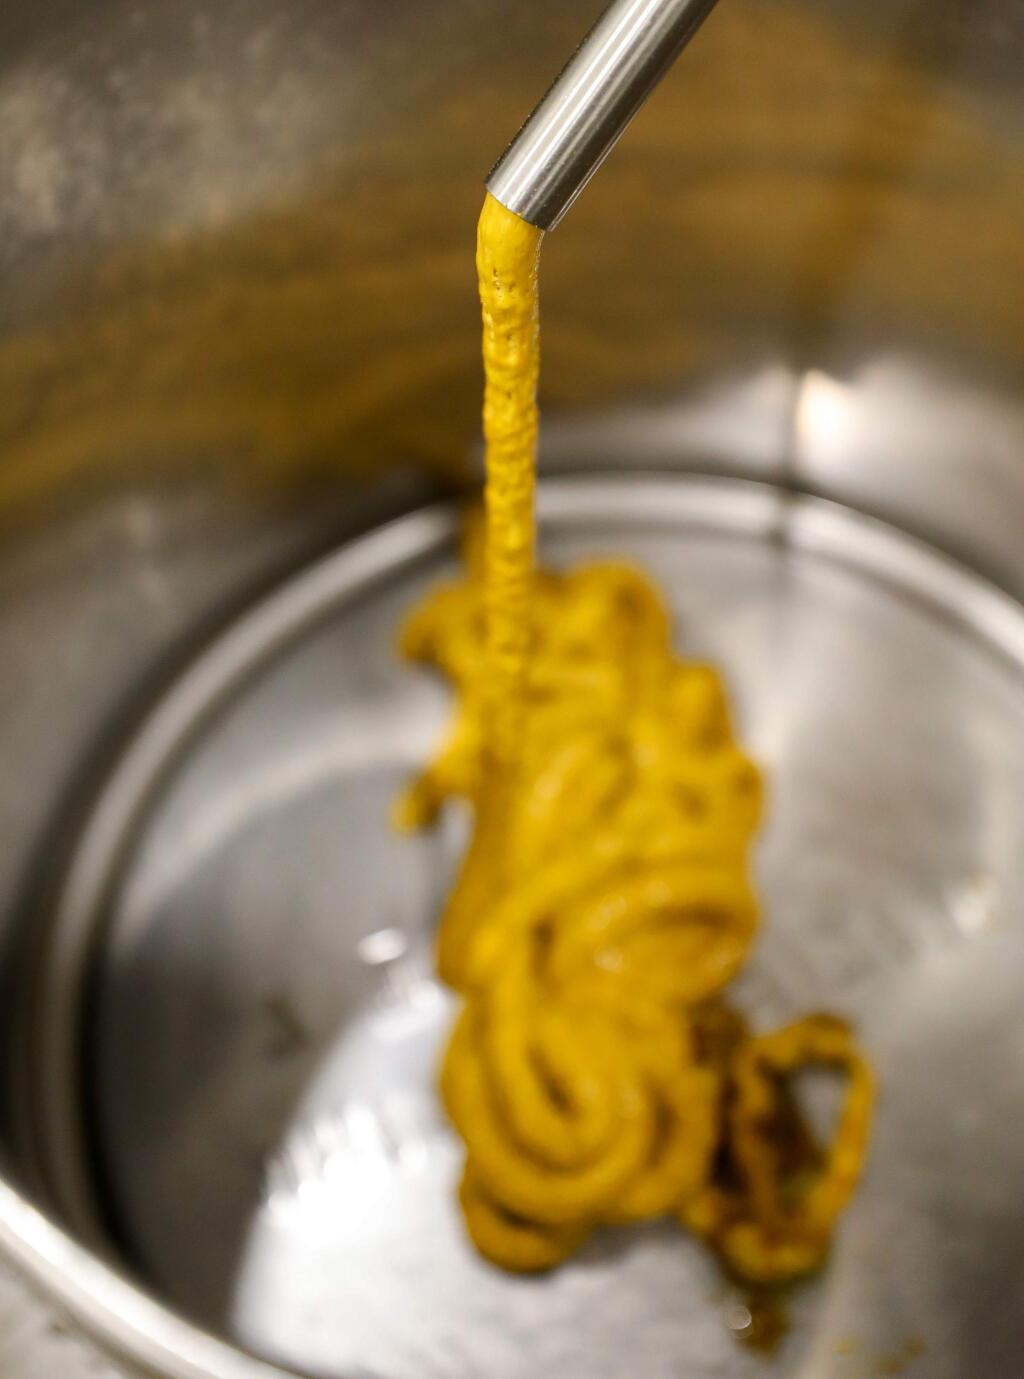 Cannabis extract slowly exits an extraction machine, before it is subjected to additional layers of refinement, at the SPARC production facility, in Santa Rosa on Friday, February 14, 2020. (Christopher Chung/ The Press Democrat)